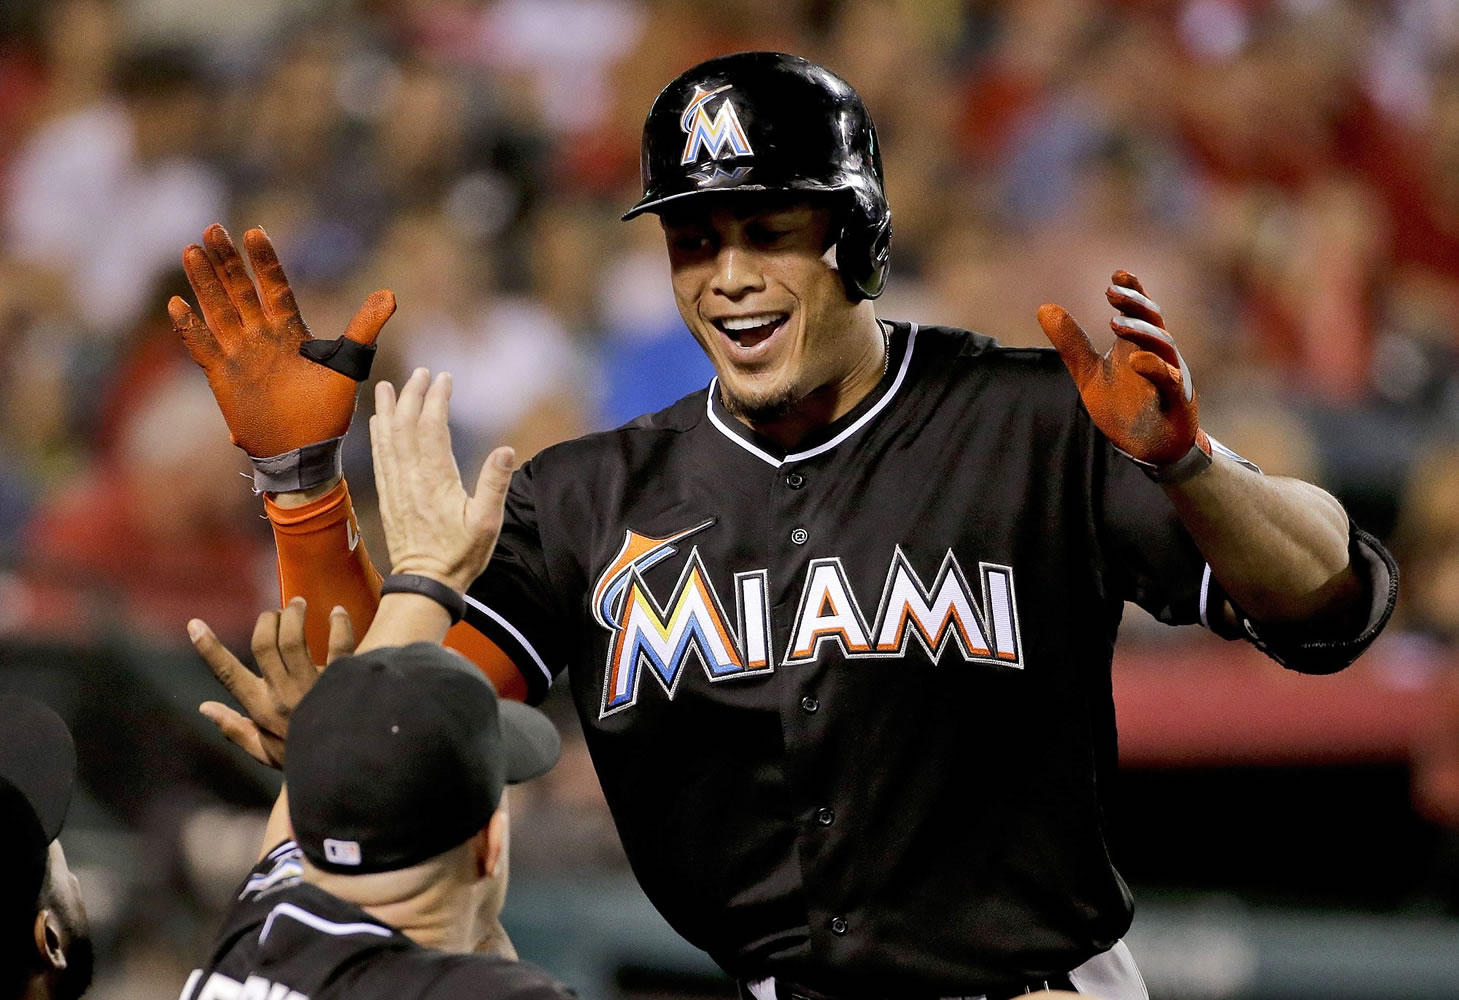 Miami Marlins' Giancarlo Stanton has agreed to terms with the team on a $325 million, 13-year contract. It's the most lucrative deal for an American athlete.